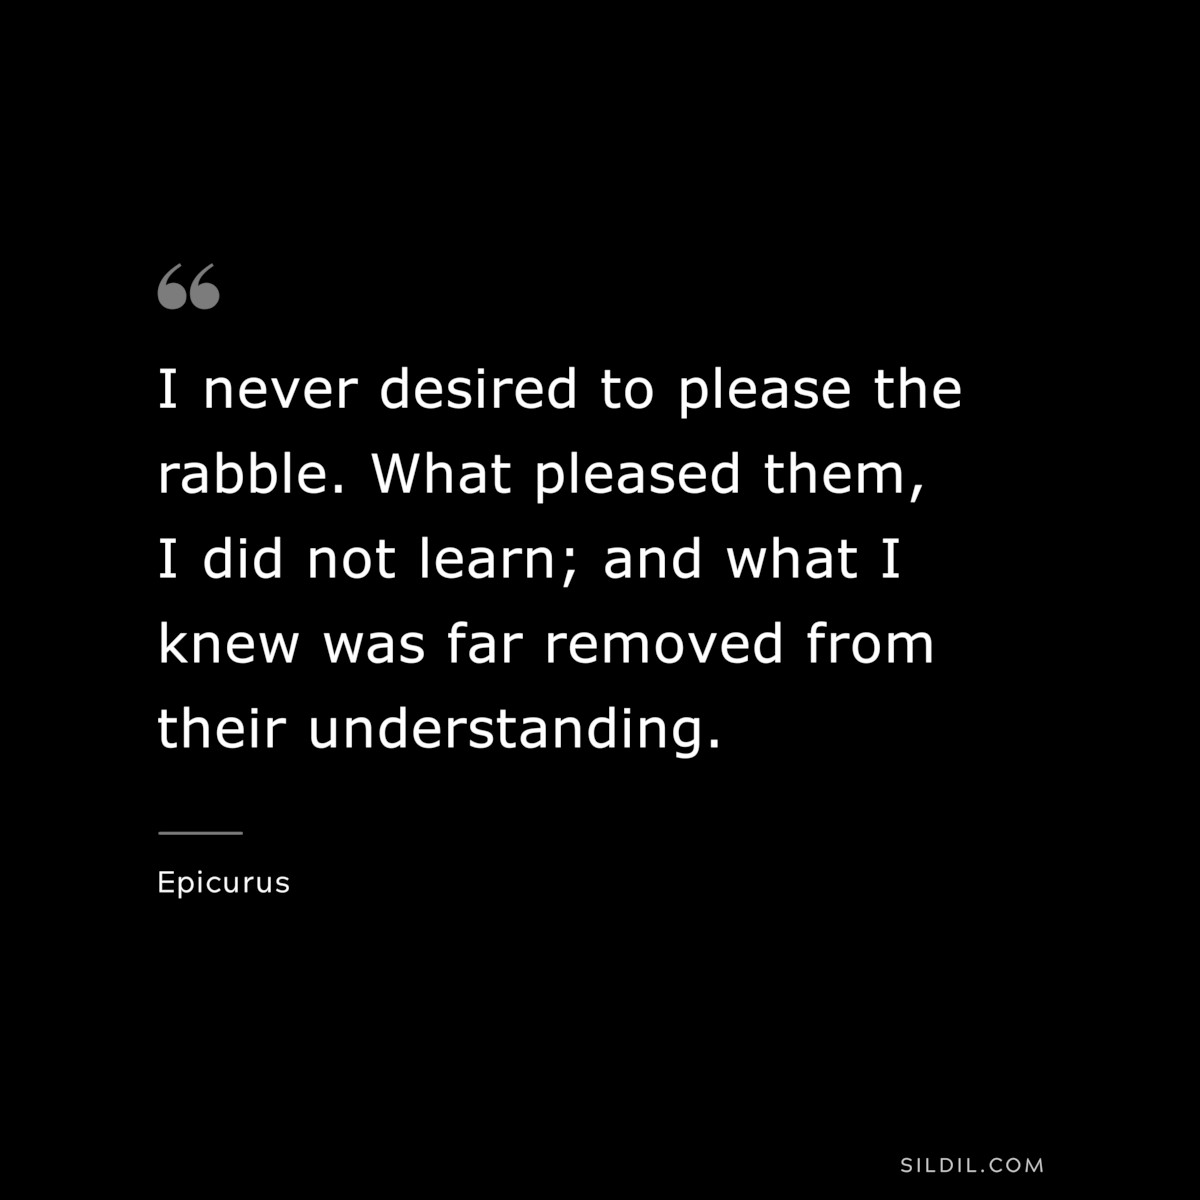 I never desired to please the rabble. What pleased them, I did not learn; and what I knew was far removed from their understanding. — Epicurus